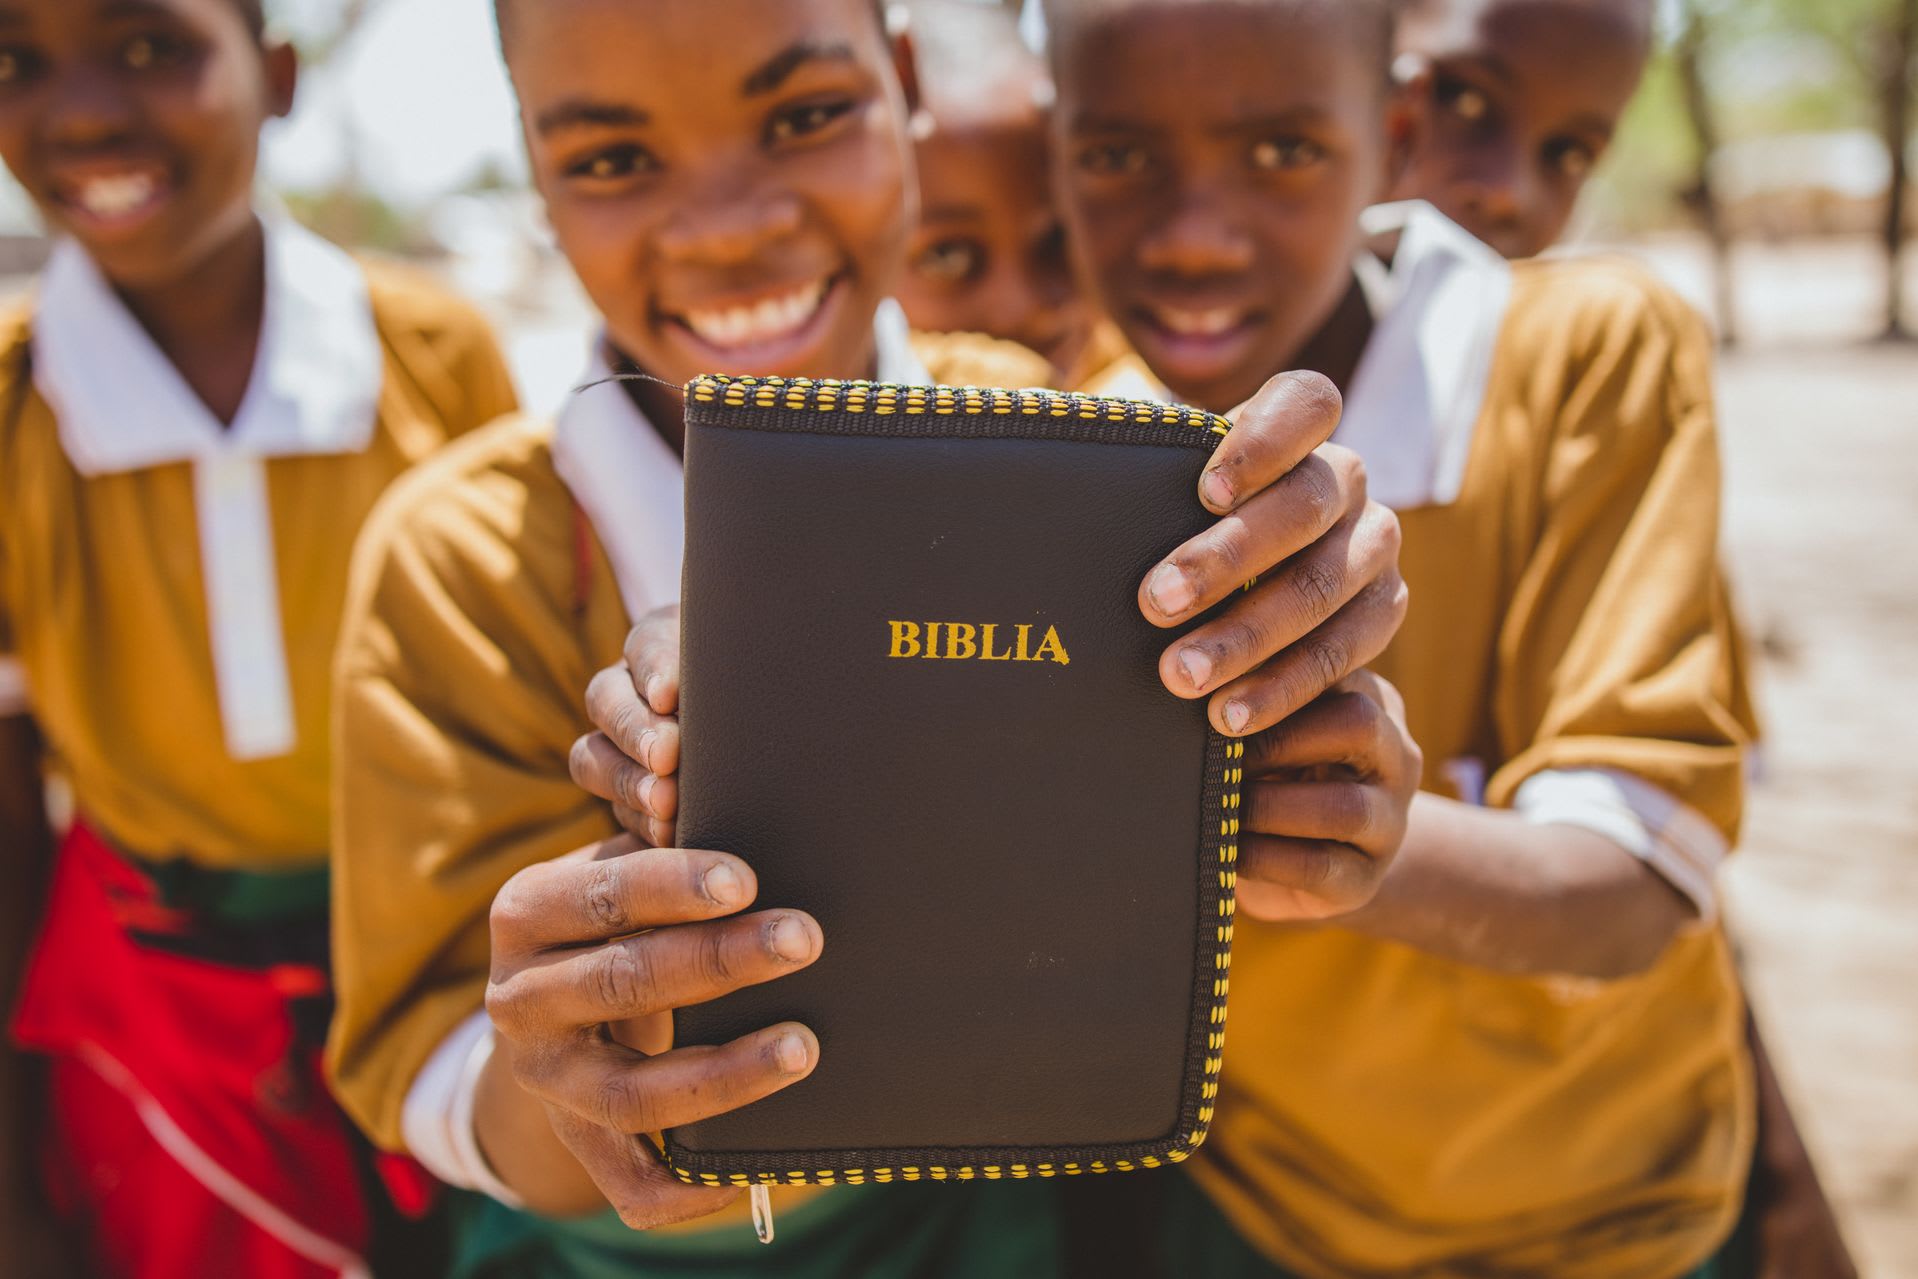 Two smiling children in Tanzania hold up a brown and yellow Bible.